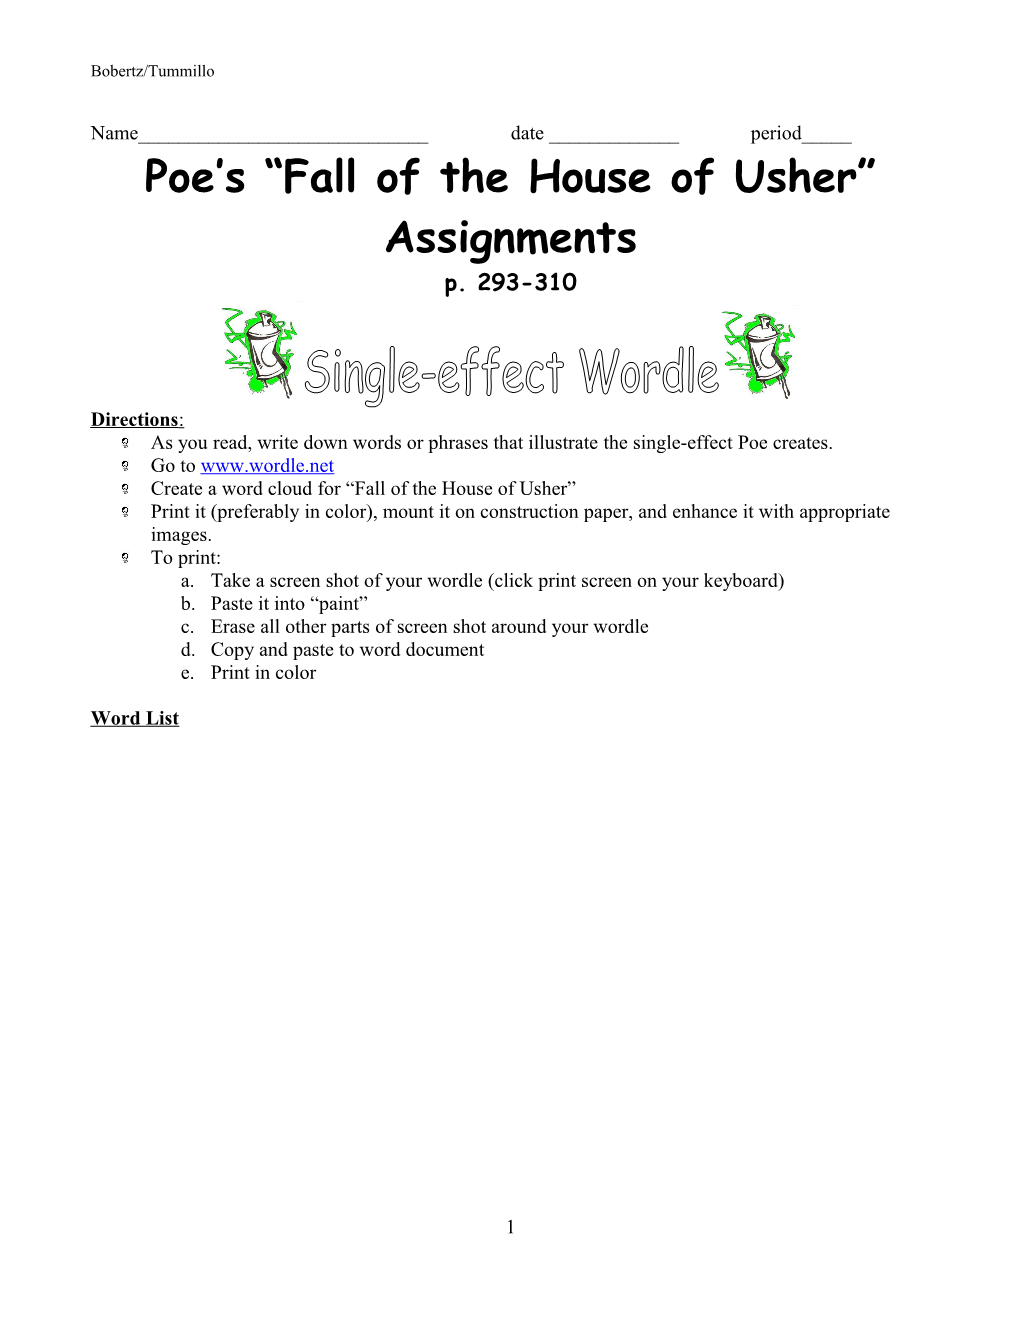 Poe S Fall of the House of Usher